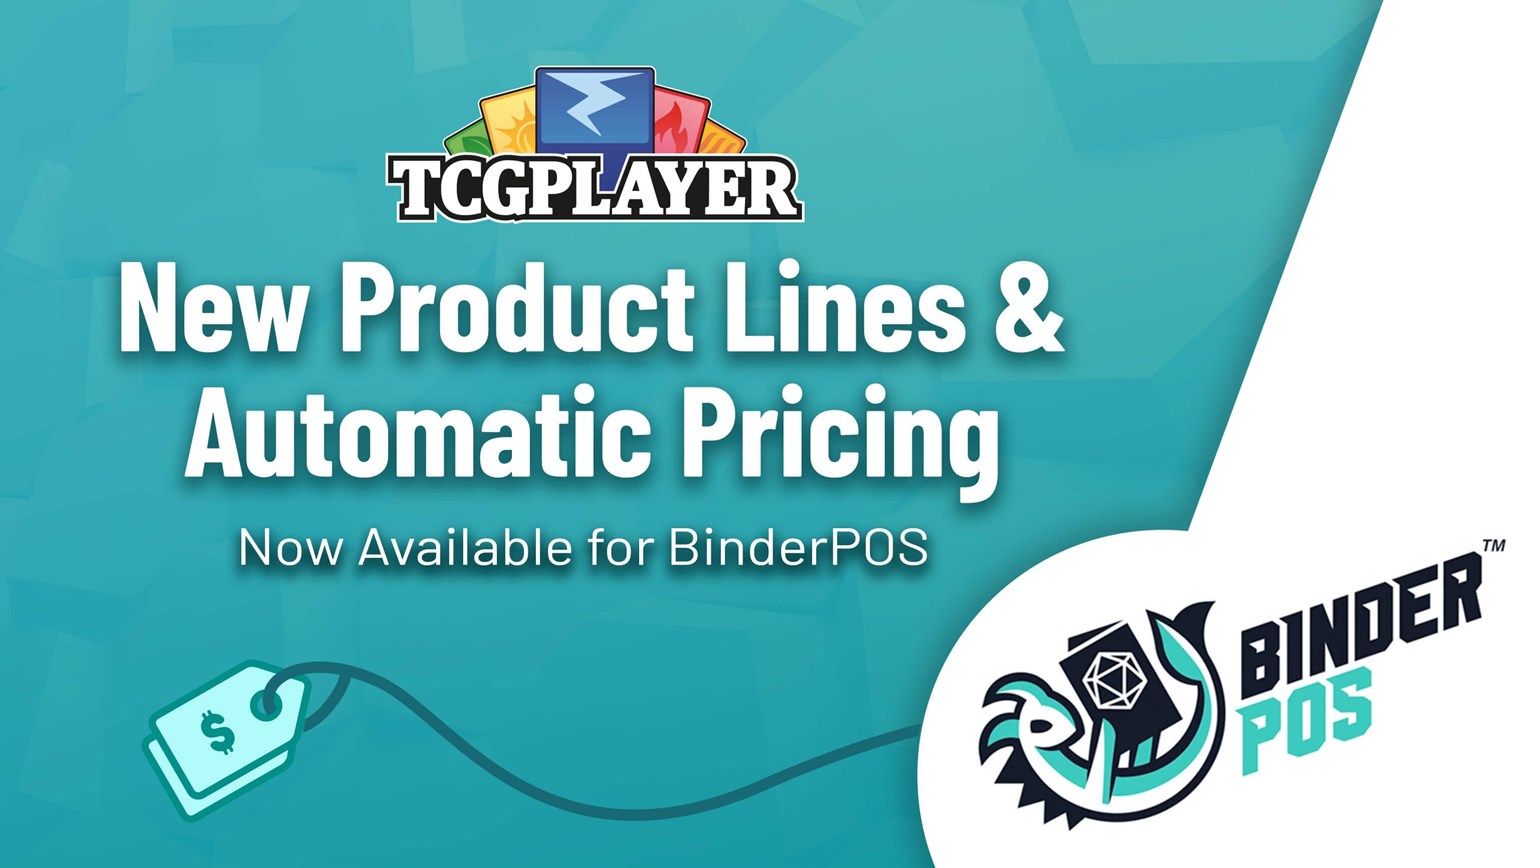 New Product Lines and Automatic Pricing Now Available For BinderPOS